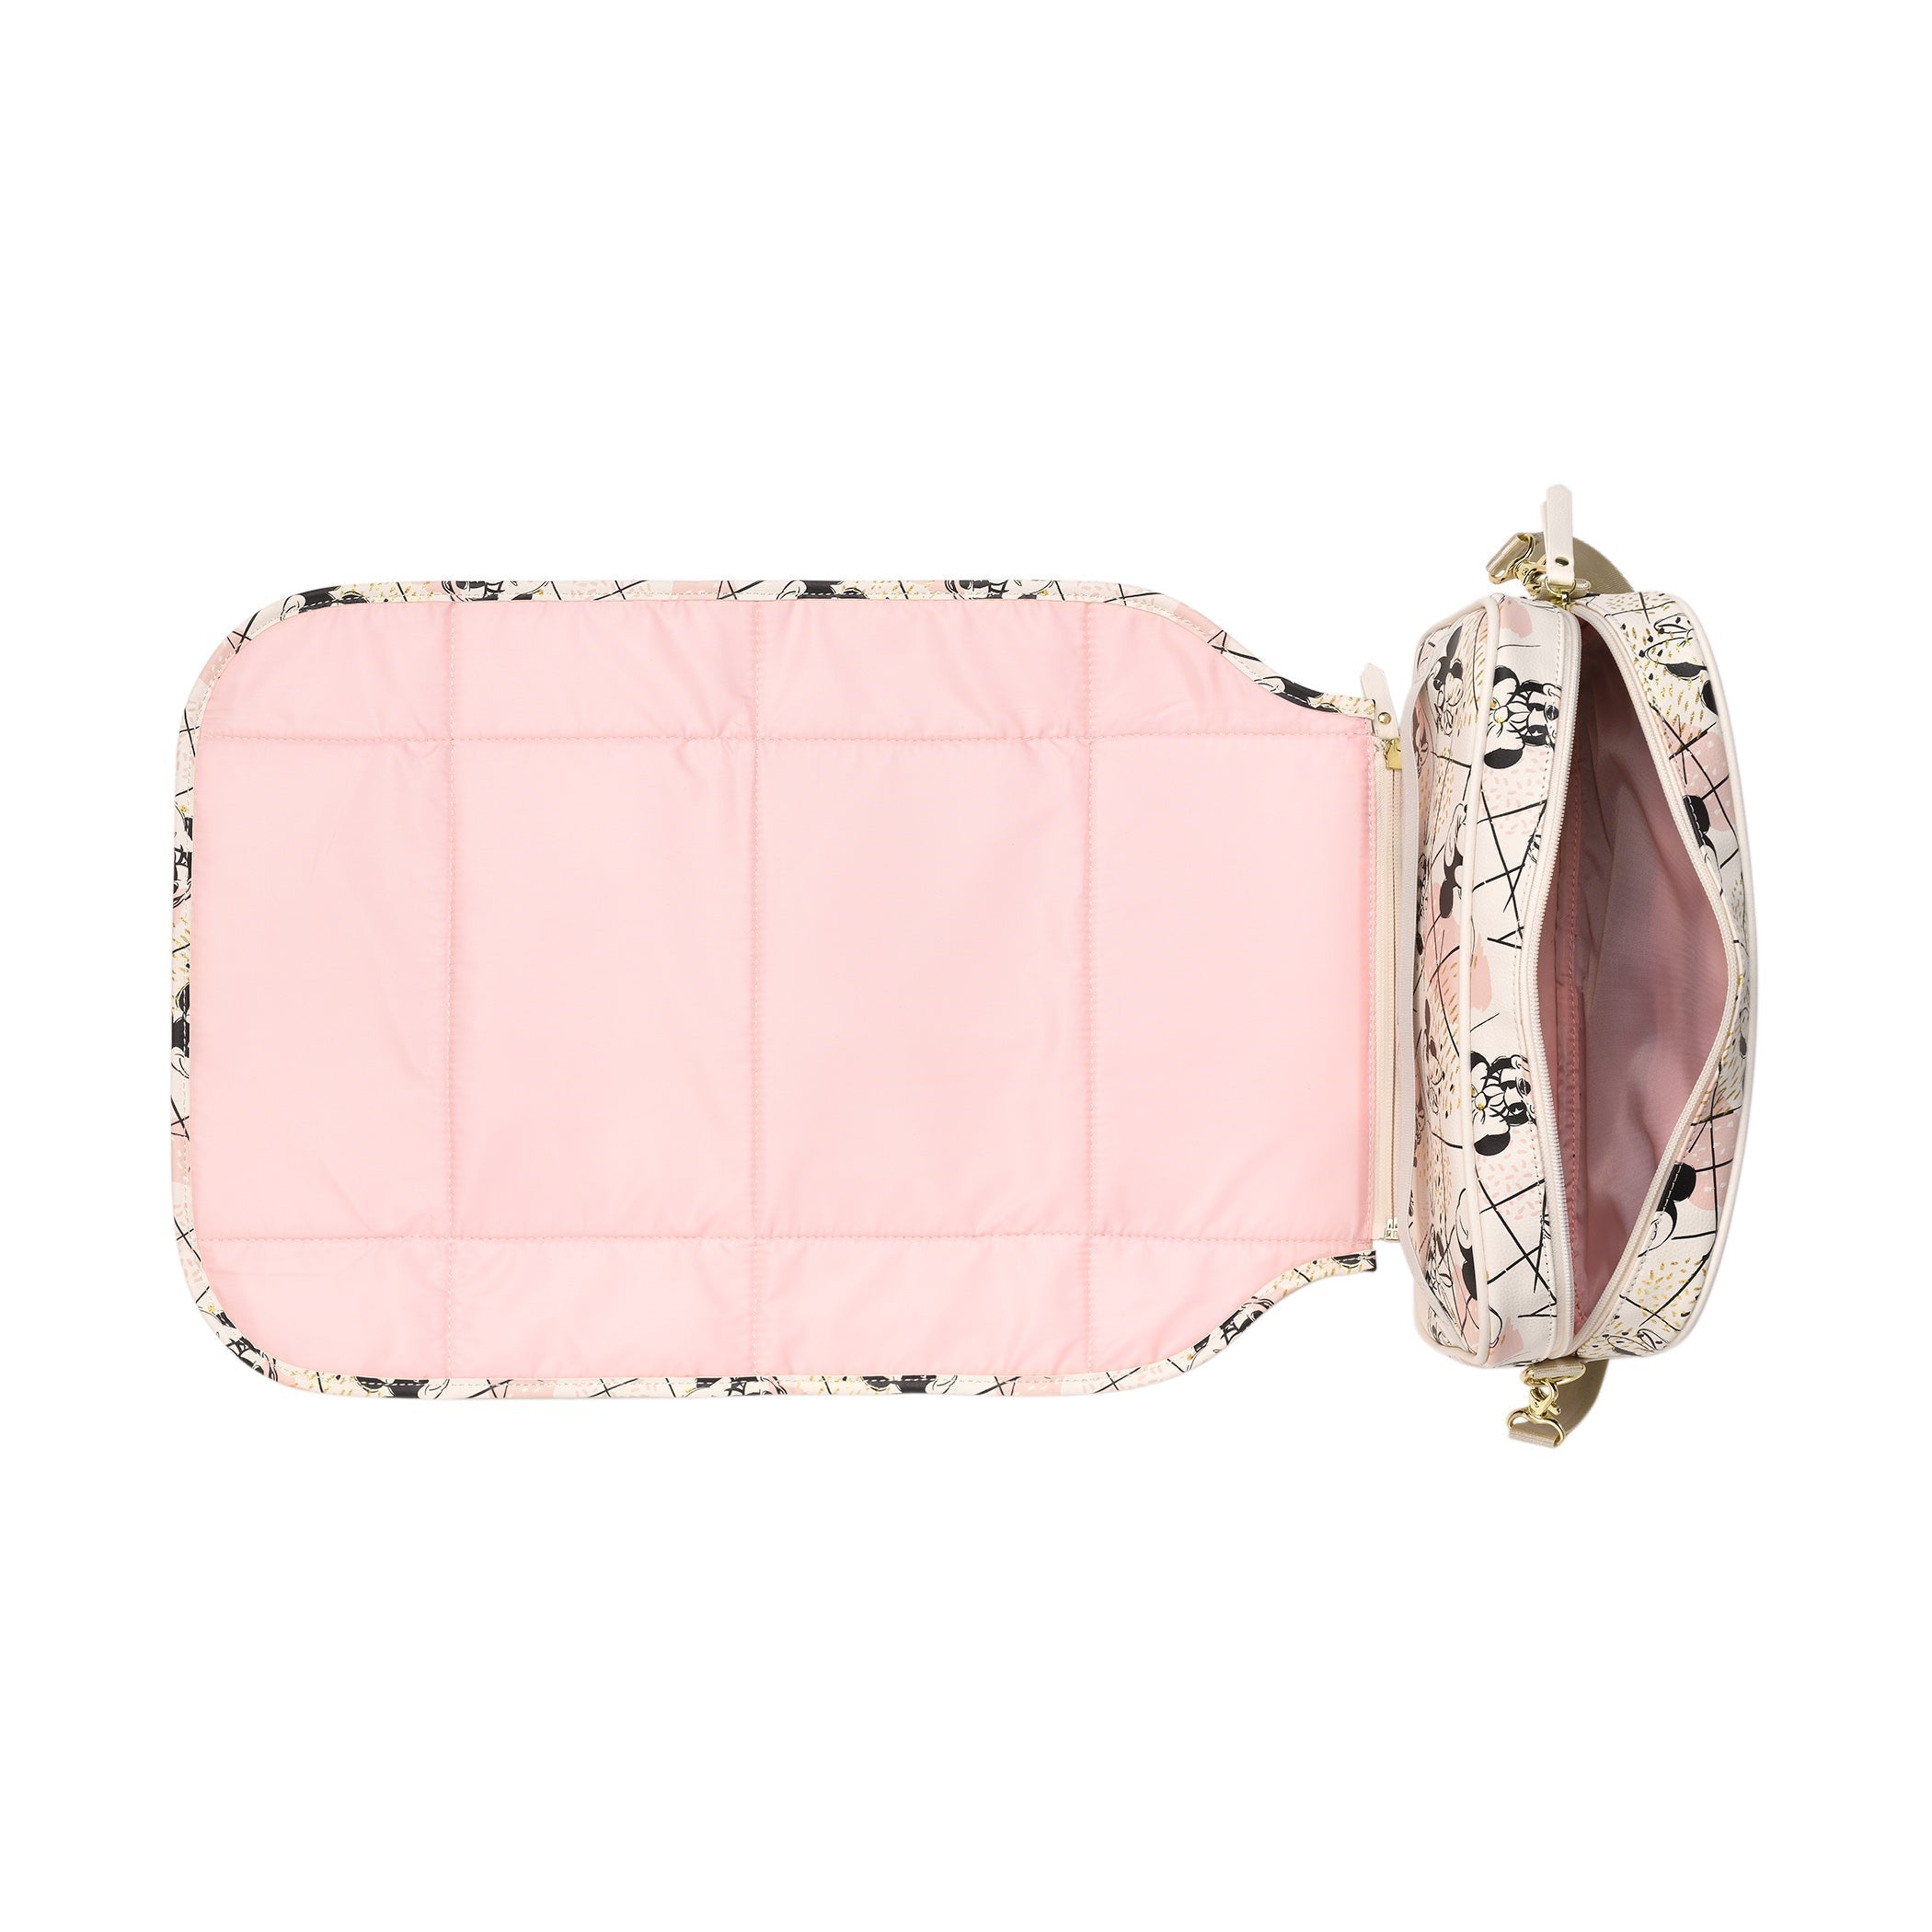 Petunia Pickle Bottom Companion Diaper Changer Clutch in Shimmery Minnie Mouse Clutche